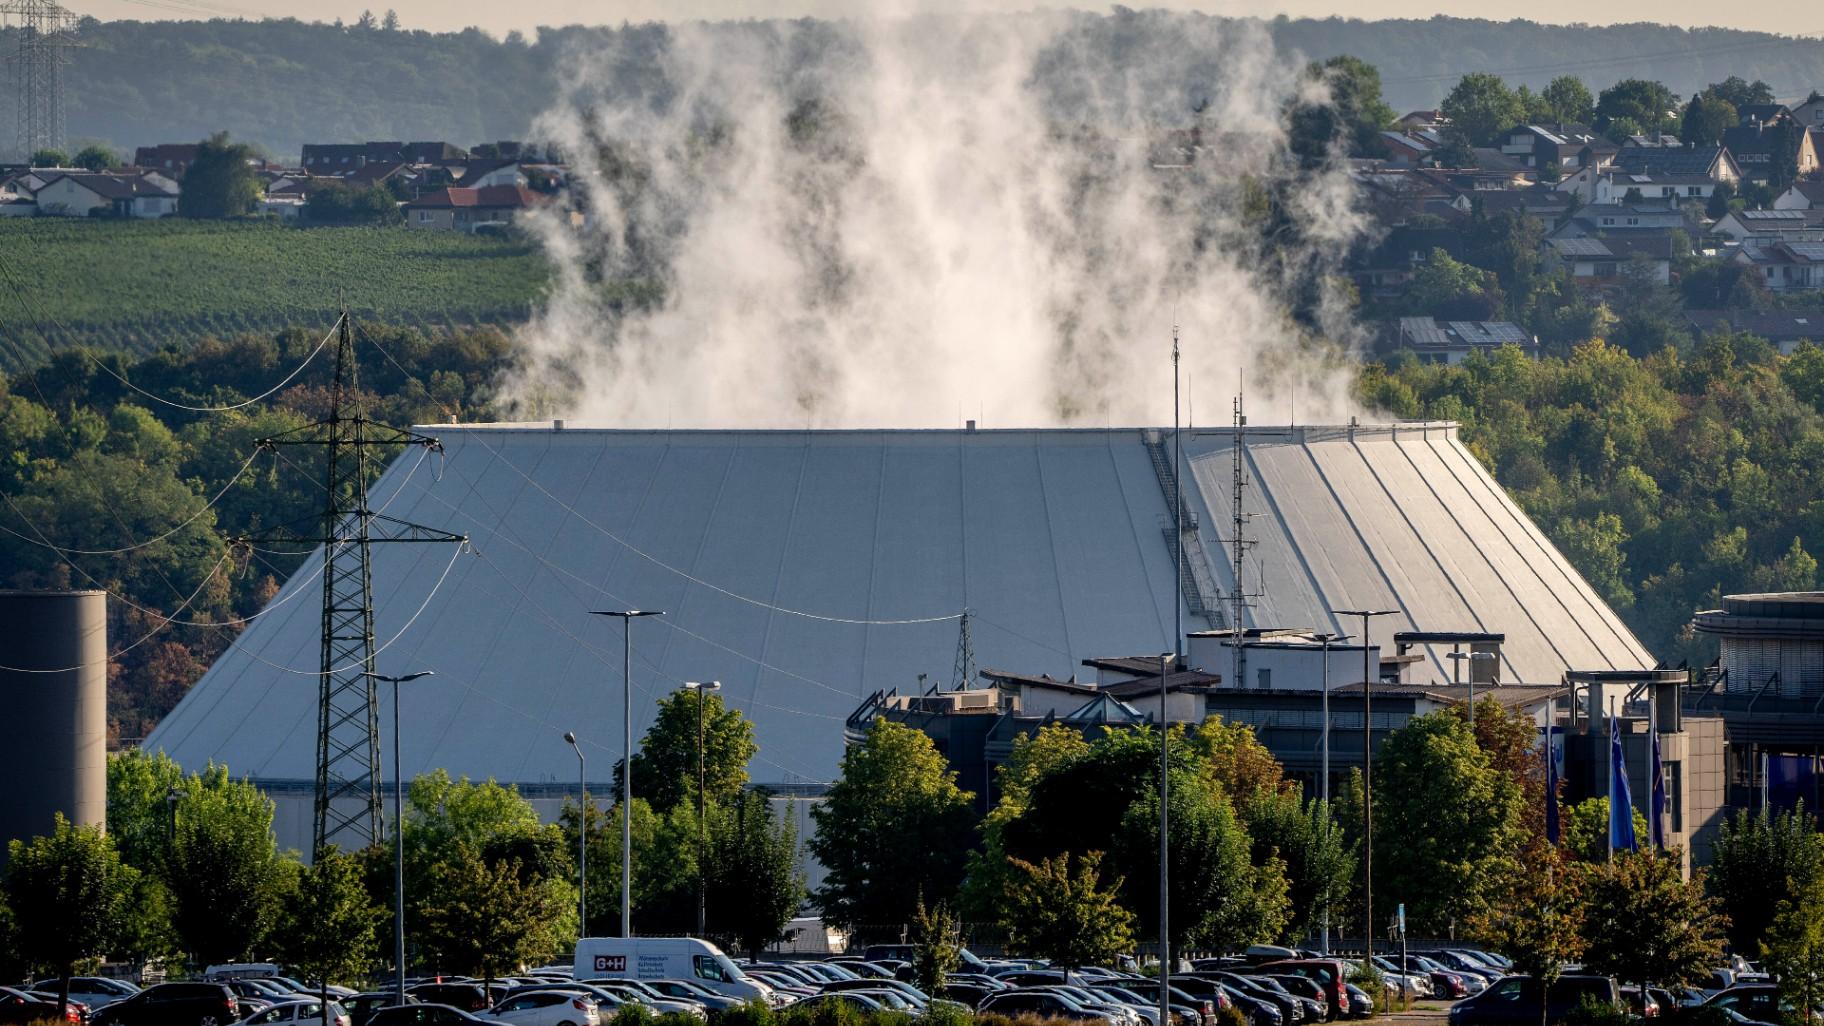 Smoke rises from the nuclear power plant of Nerckarwestheim in Neckarwestheim, Germany, on Aug. 22, 2022. (AP Photo / Michael Probst, File)